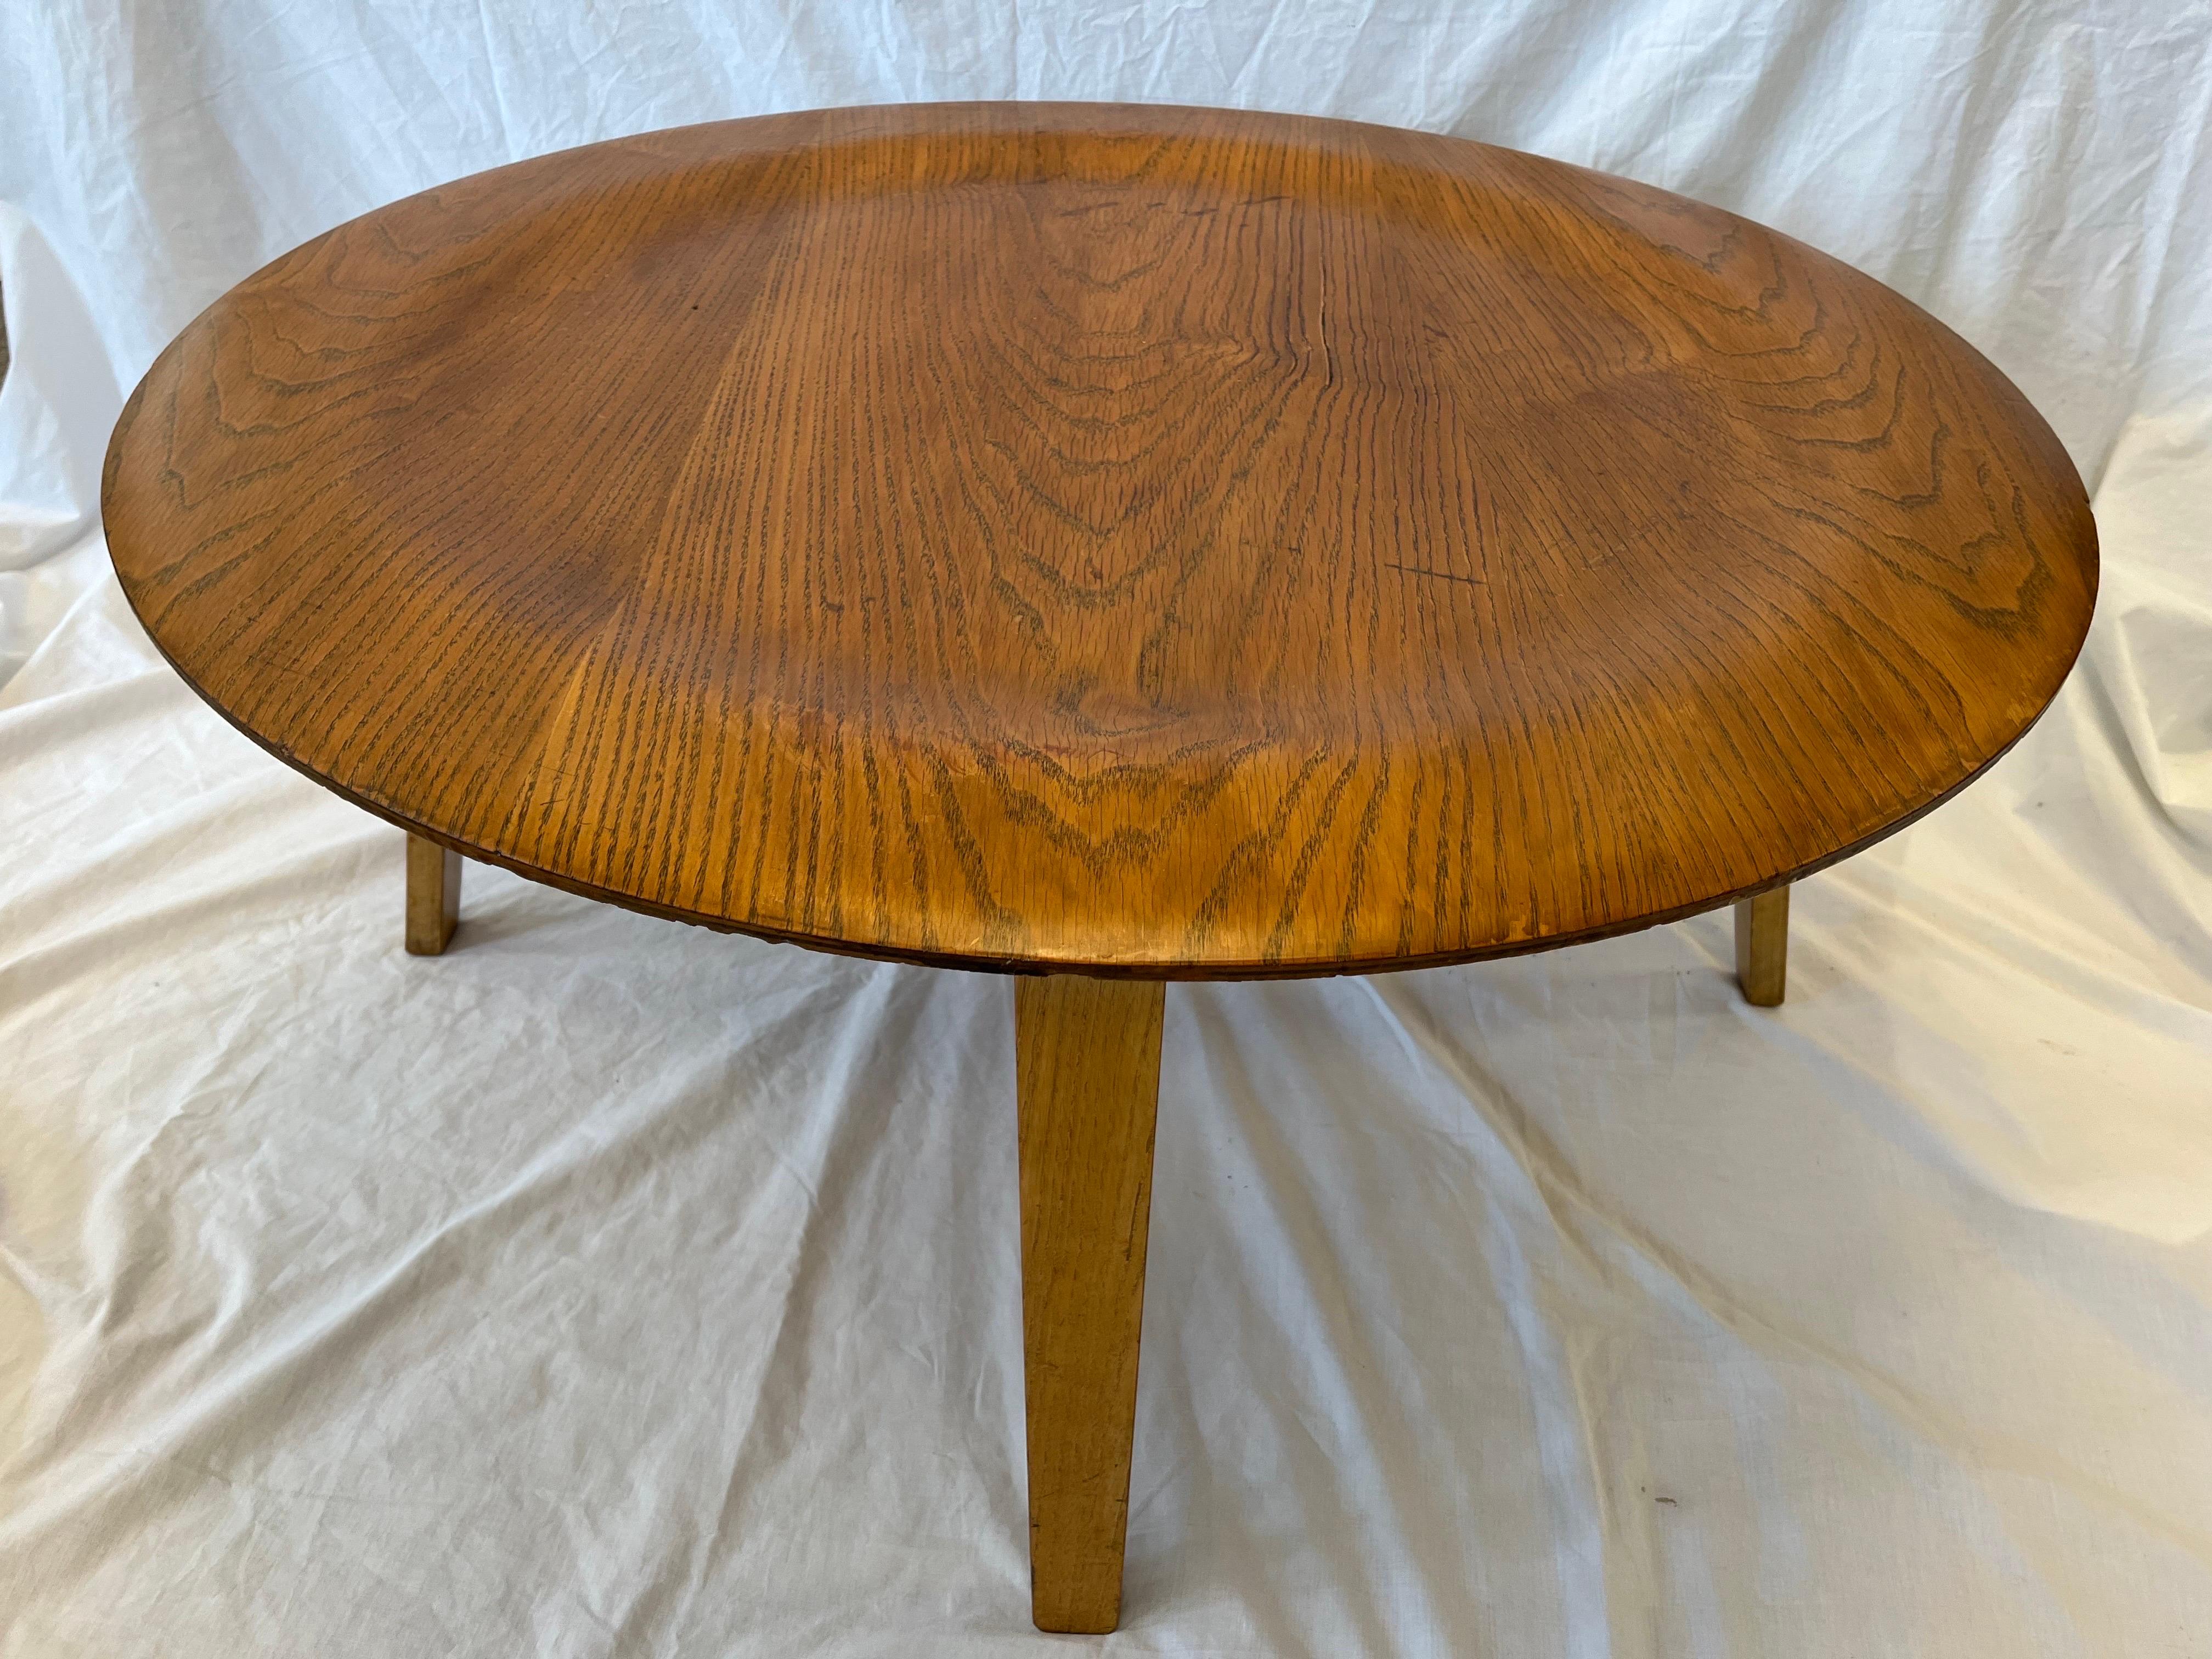 20th Century Vintage Charles Eames CTW Molded Plywood Coffee Table circa 1950s Label Verso